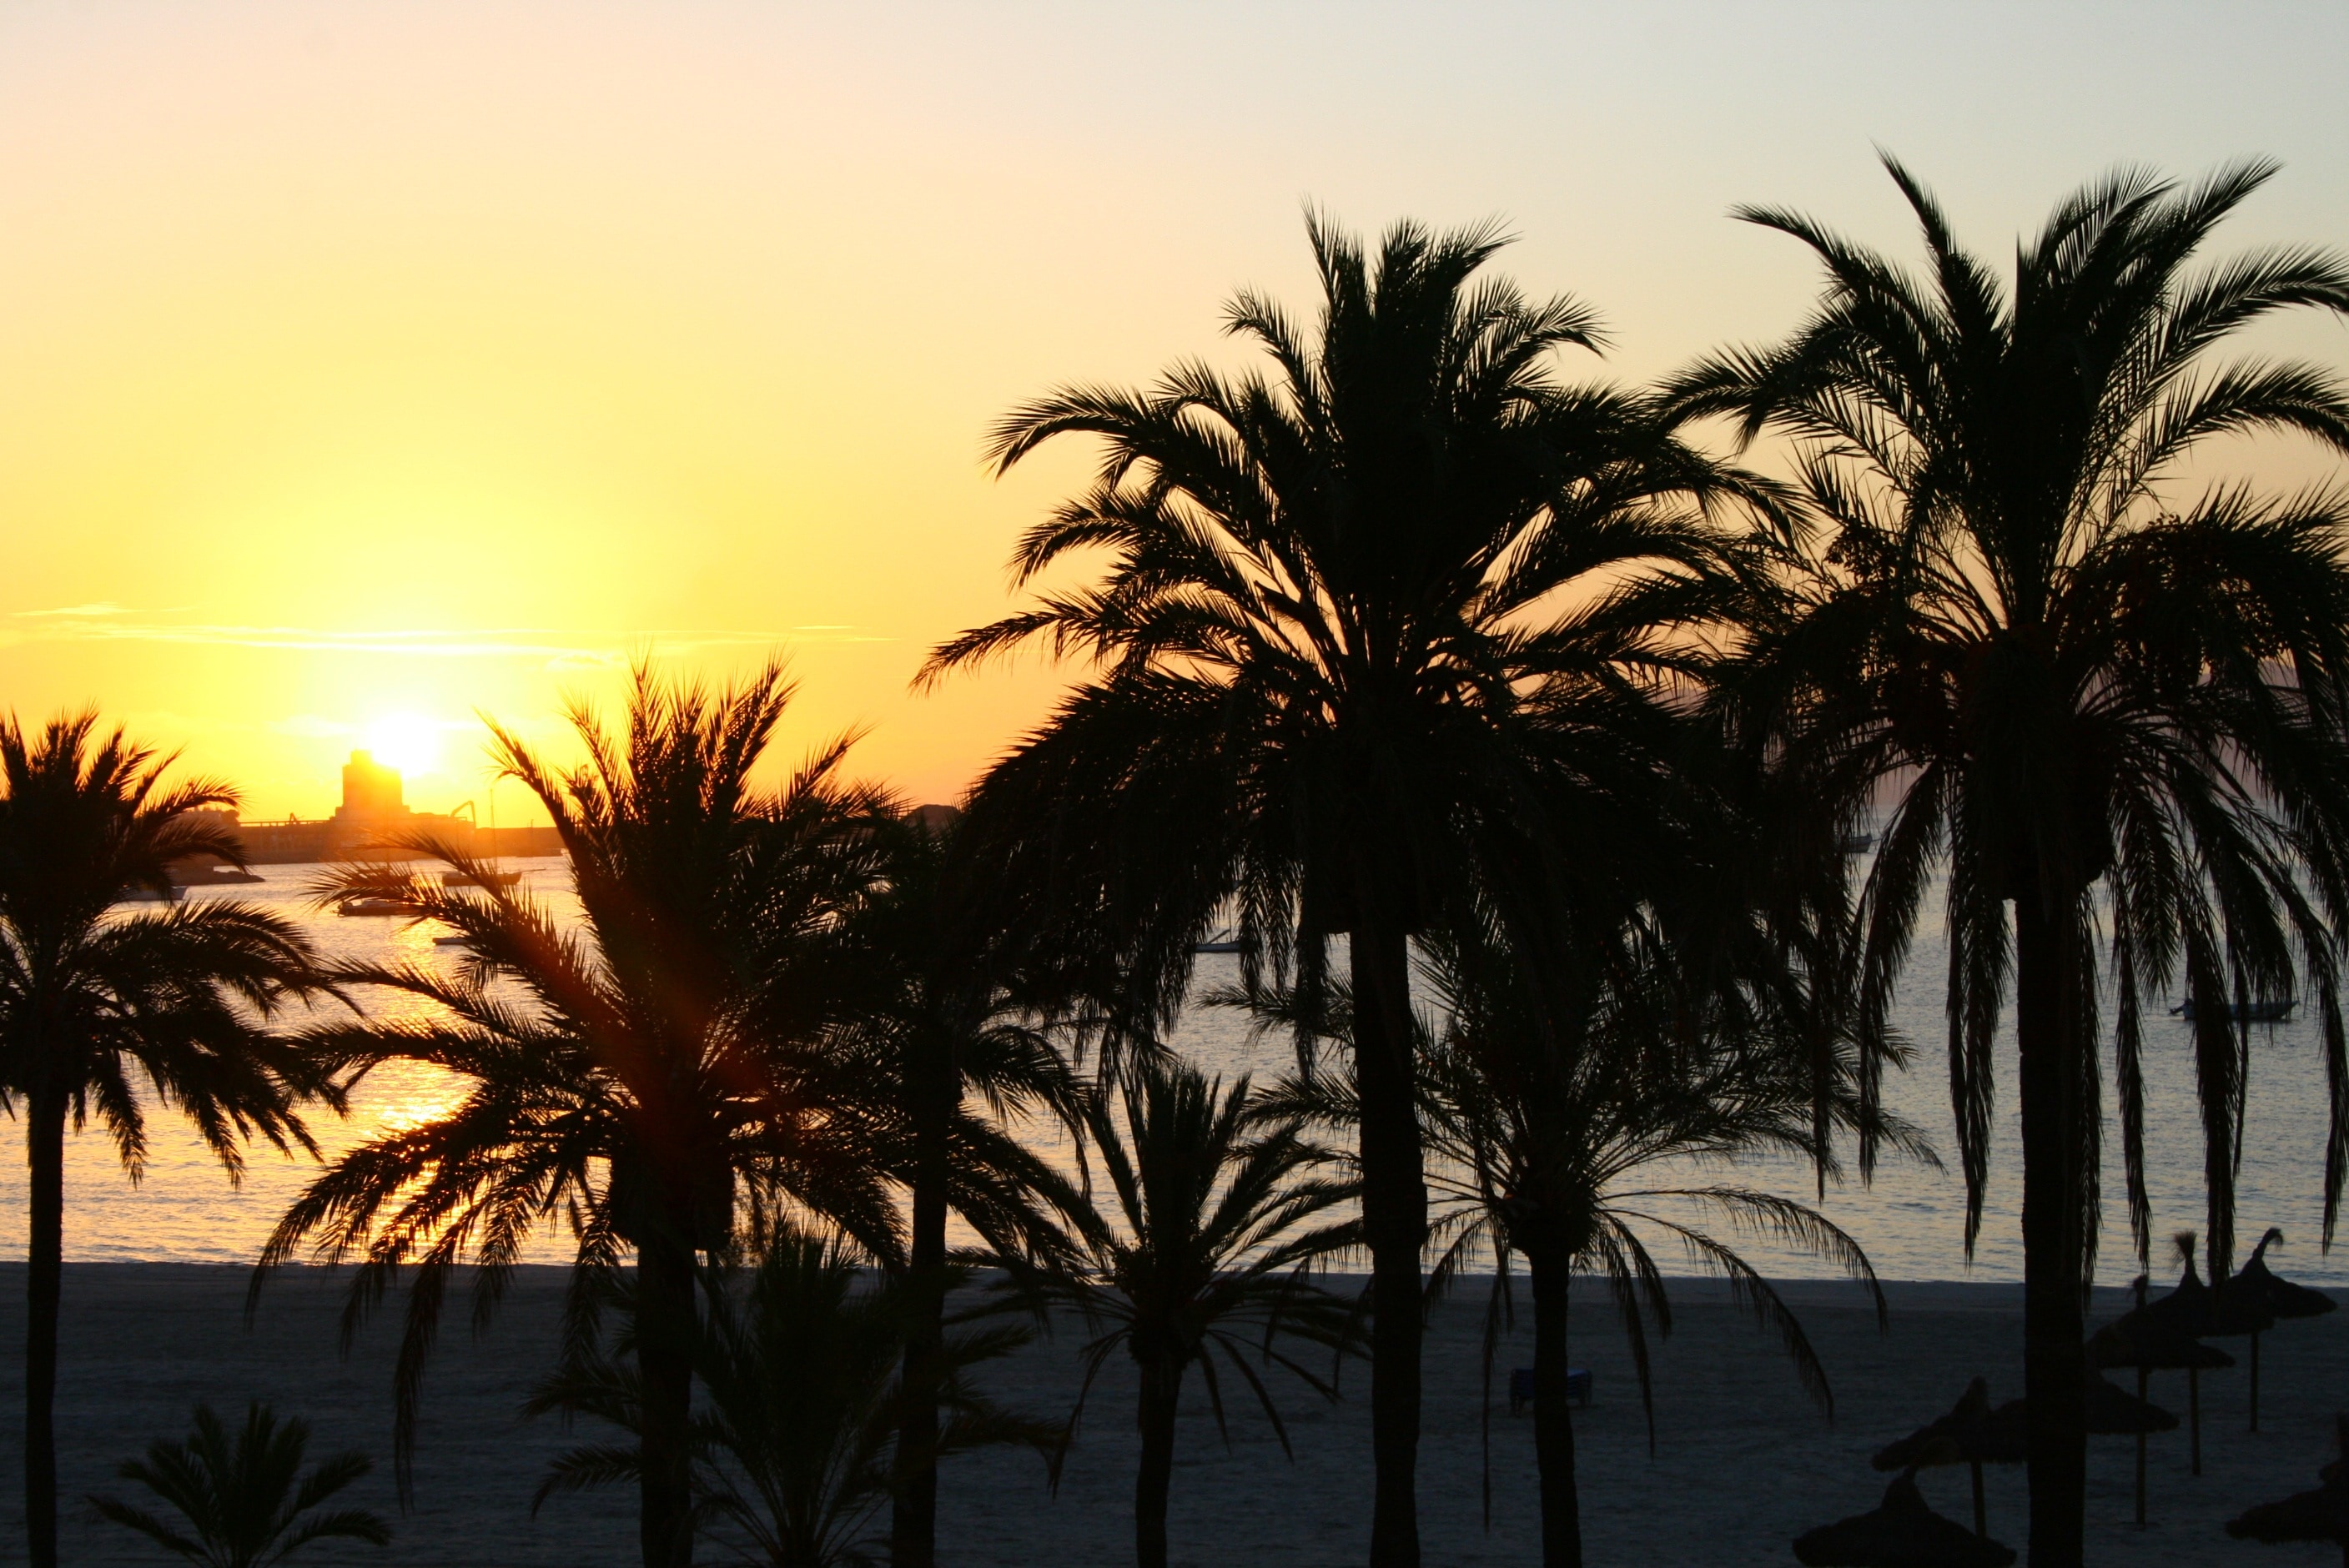 1920x1080 Wallpaper Silhouette Of Palm Trees In Seashore During